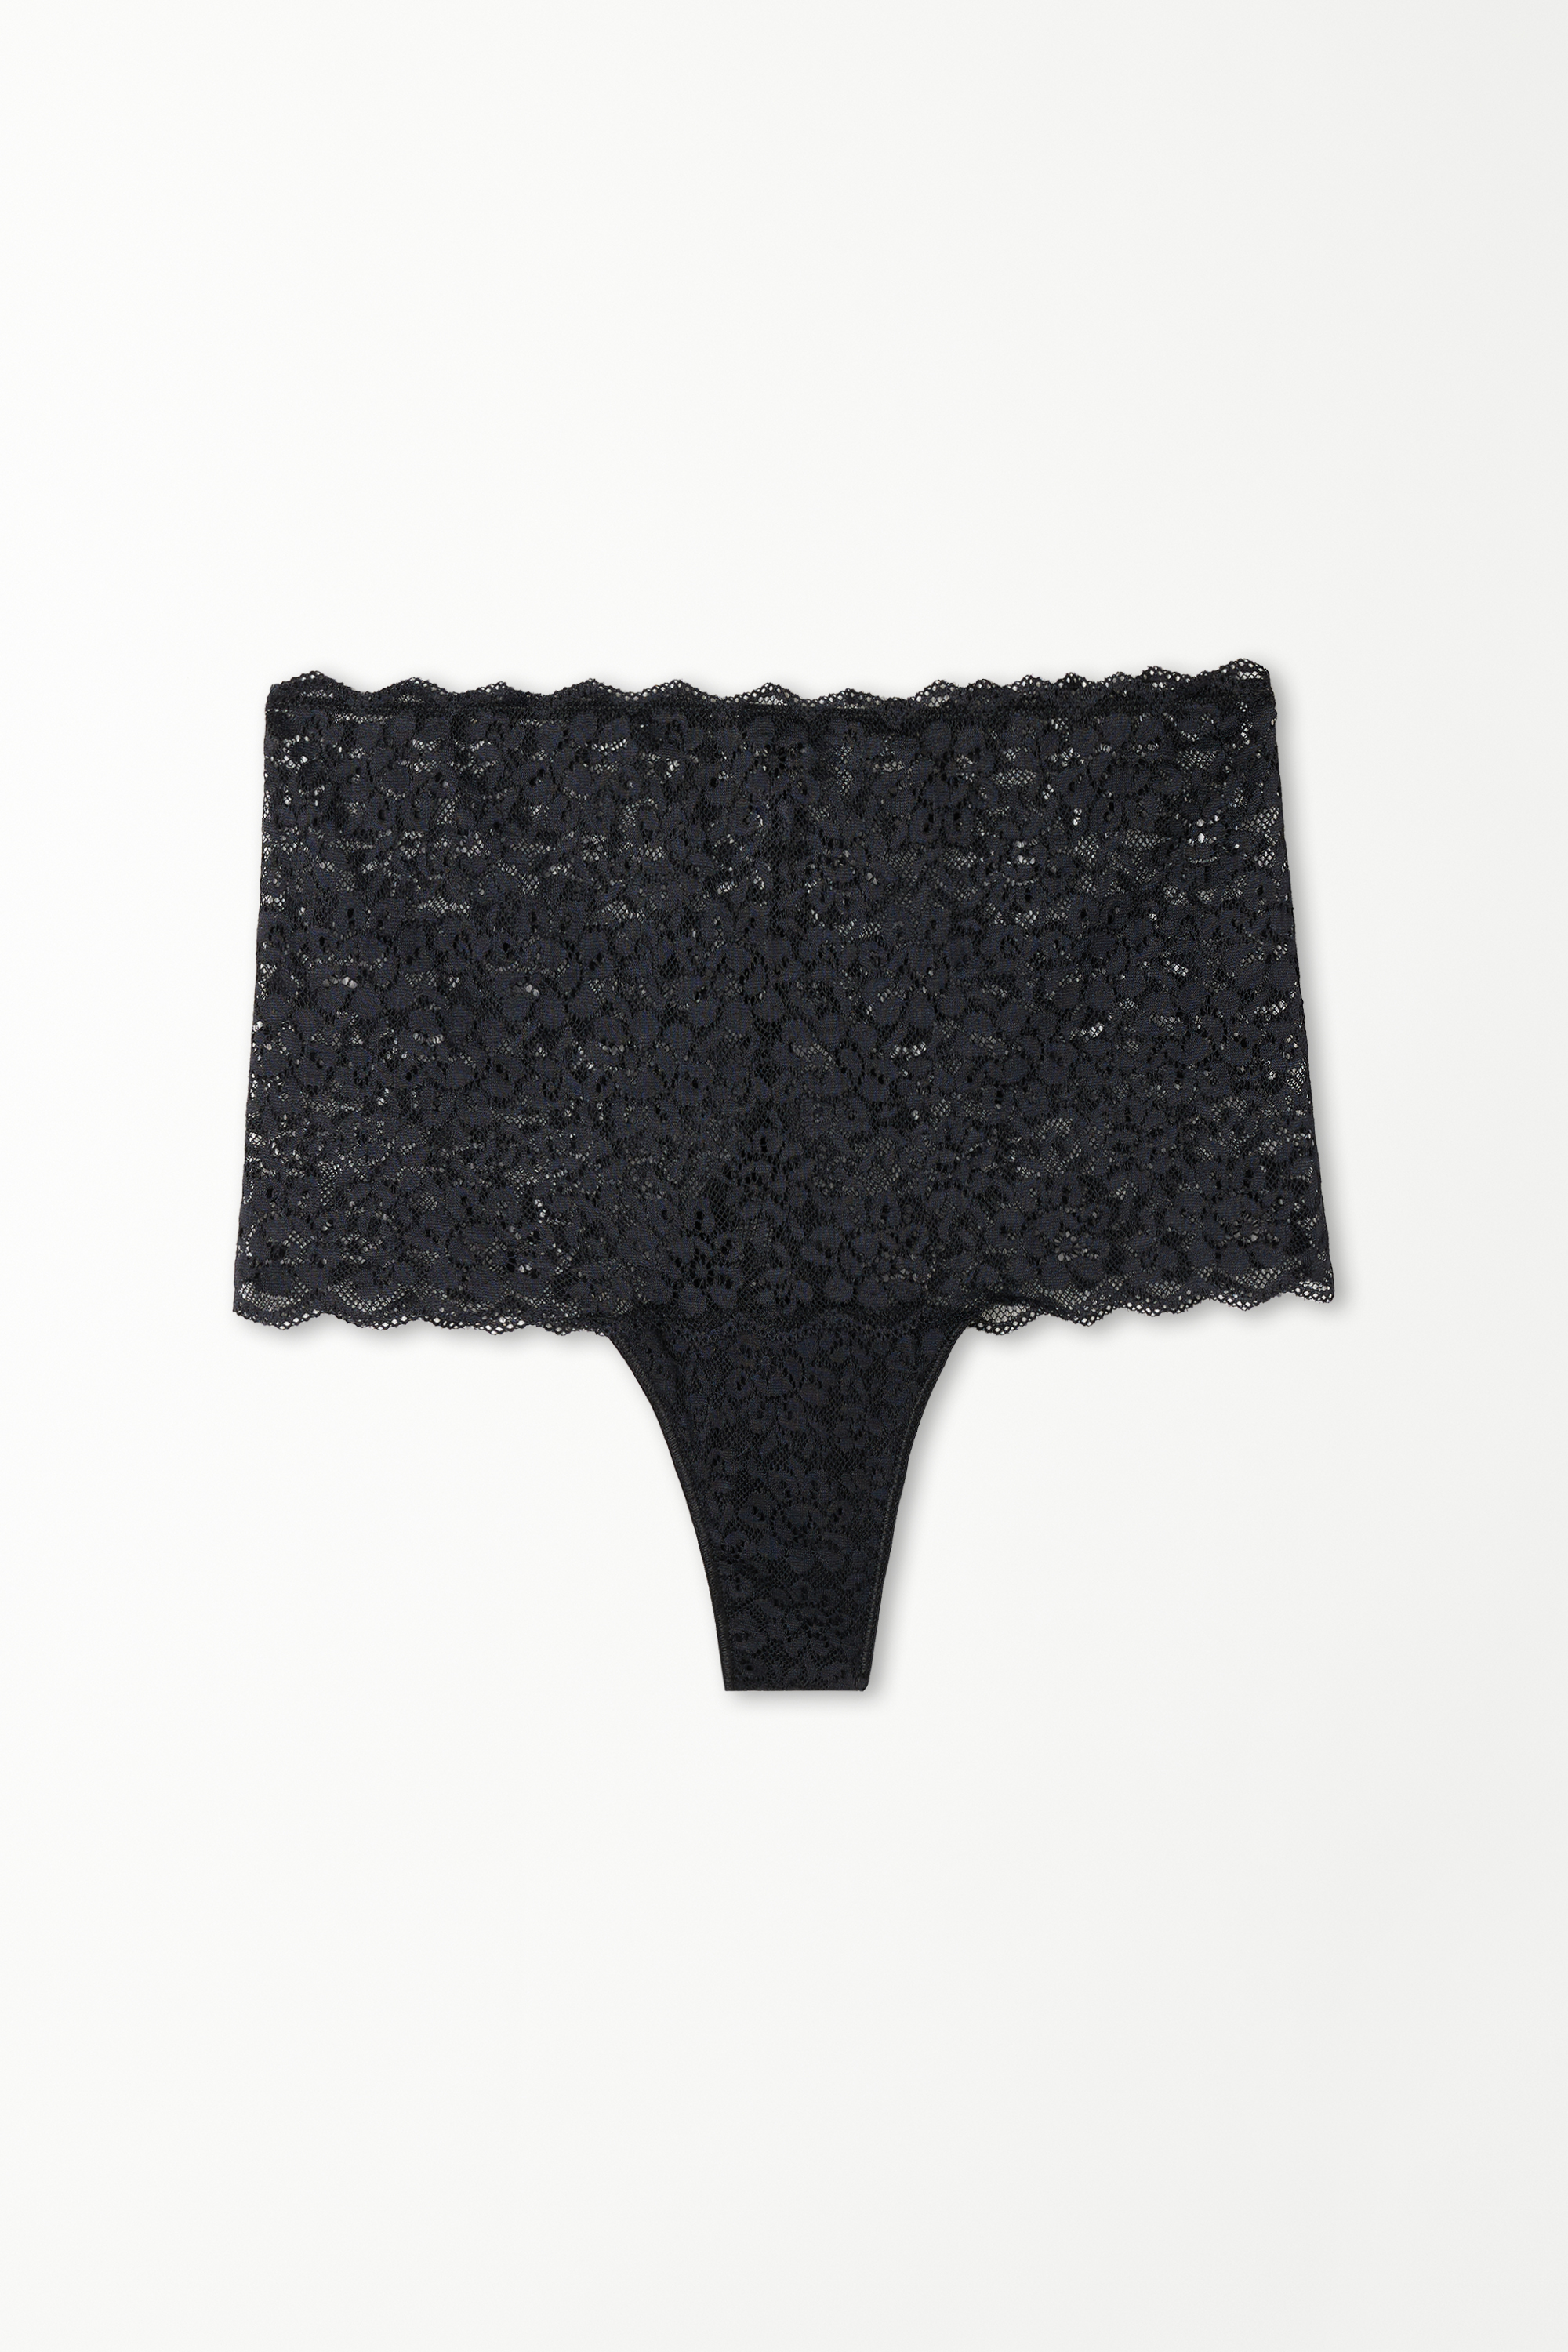 High-Waist French Knickers in Recycled Lace